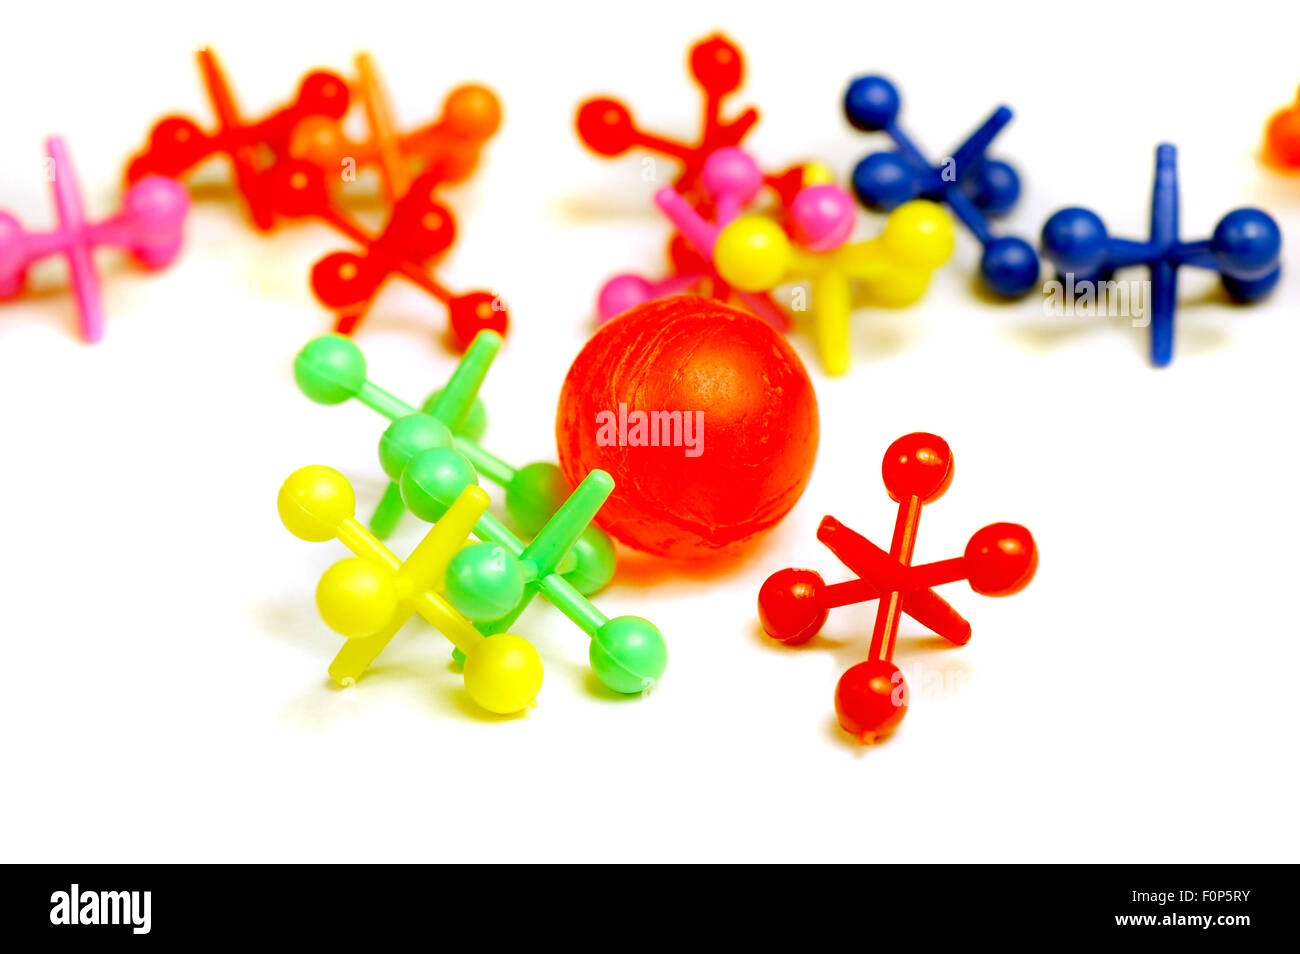 Jacks and ball isolated on a white background Stock Photo